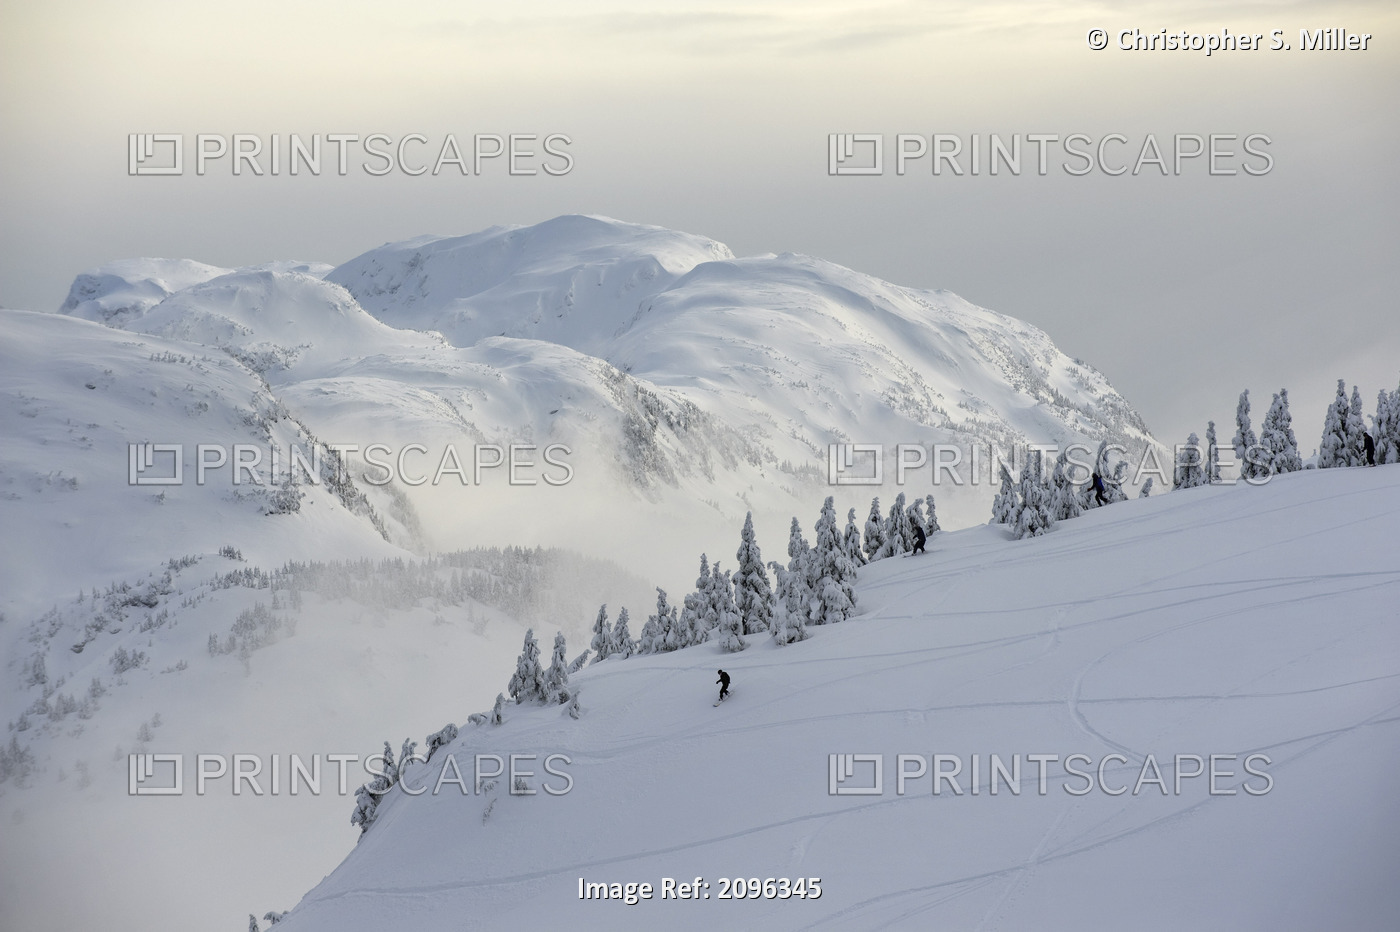 Snowboarders And Skiers Enjoy The Freshly Snow Covered East-Side Of The ...